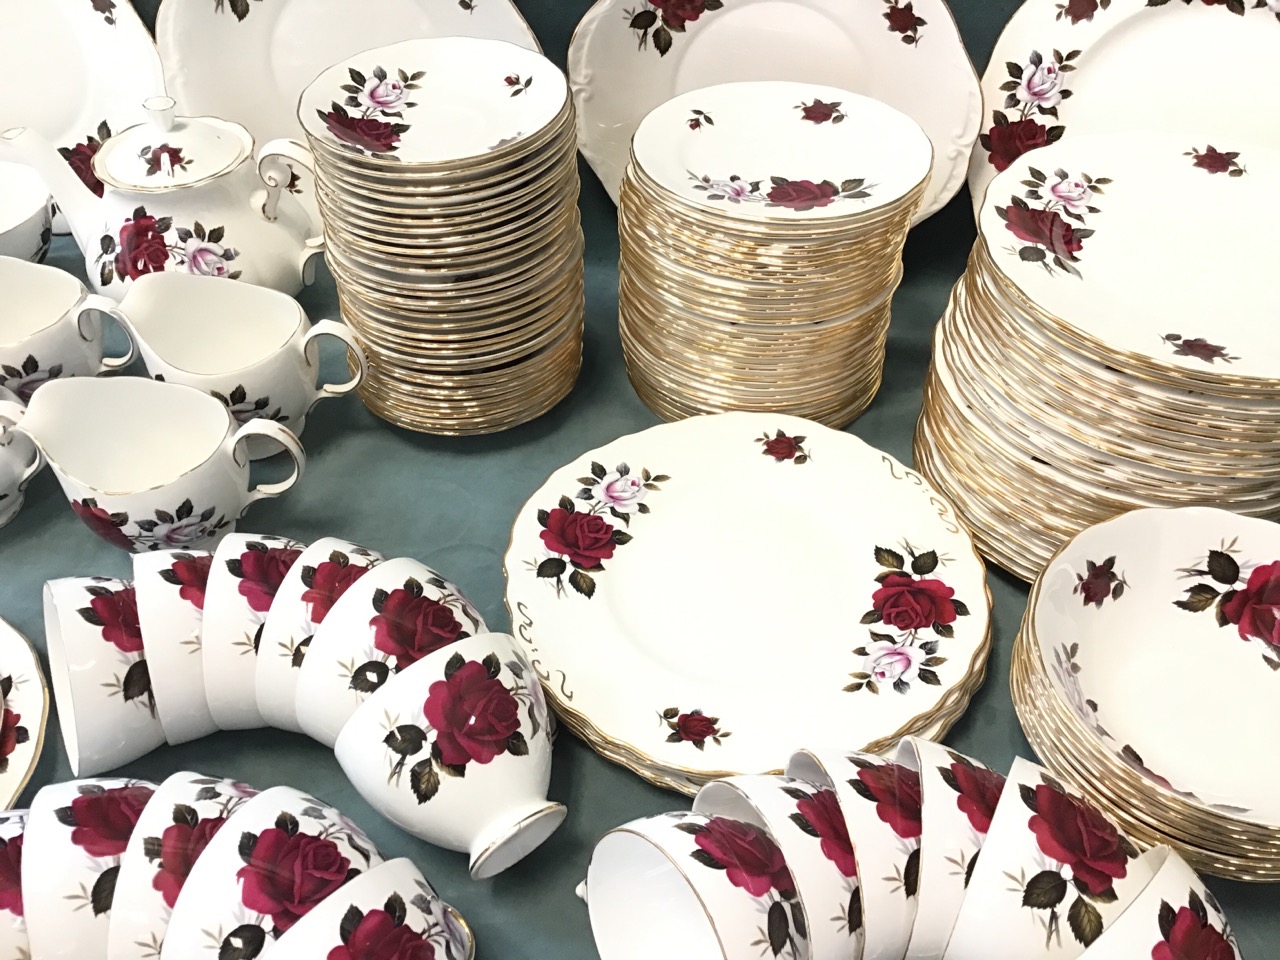 An extensive Colclough porcelain dinner & tea service decorated with roses - plates, cups & saucers, - Image 3 of 3